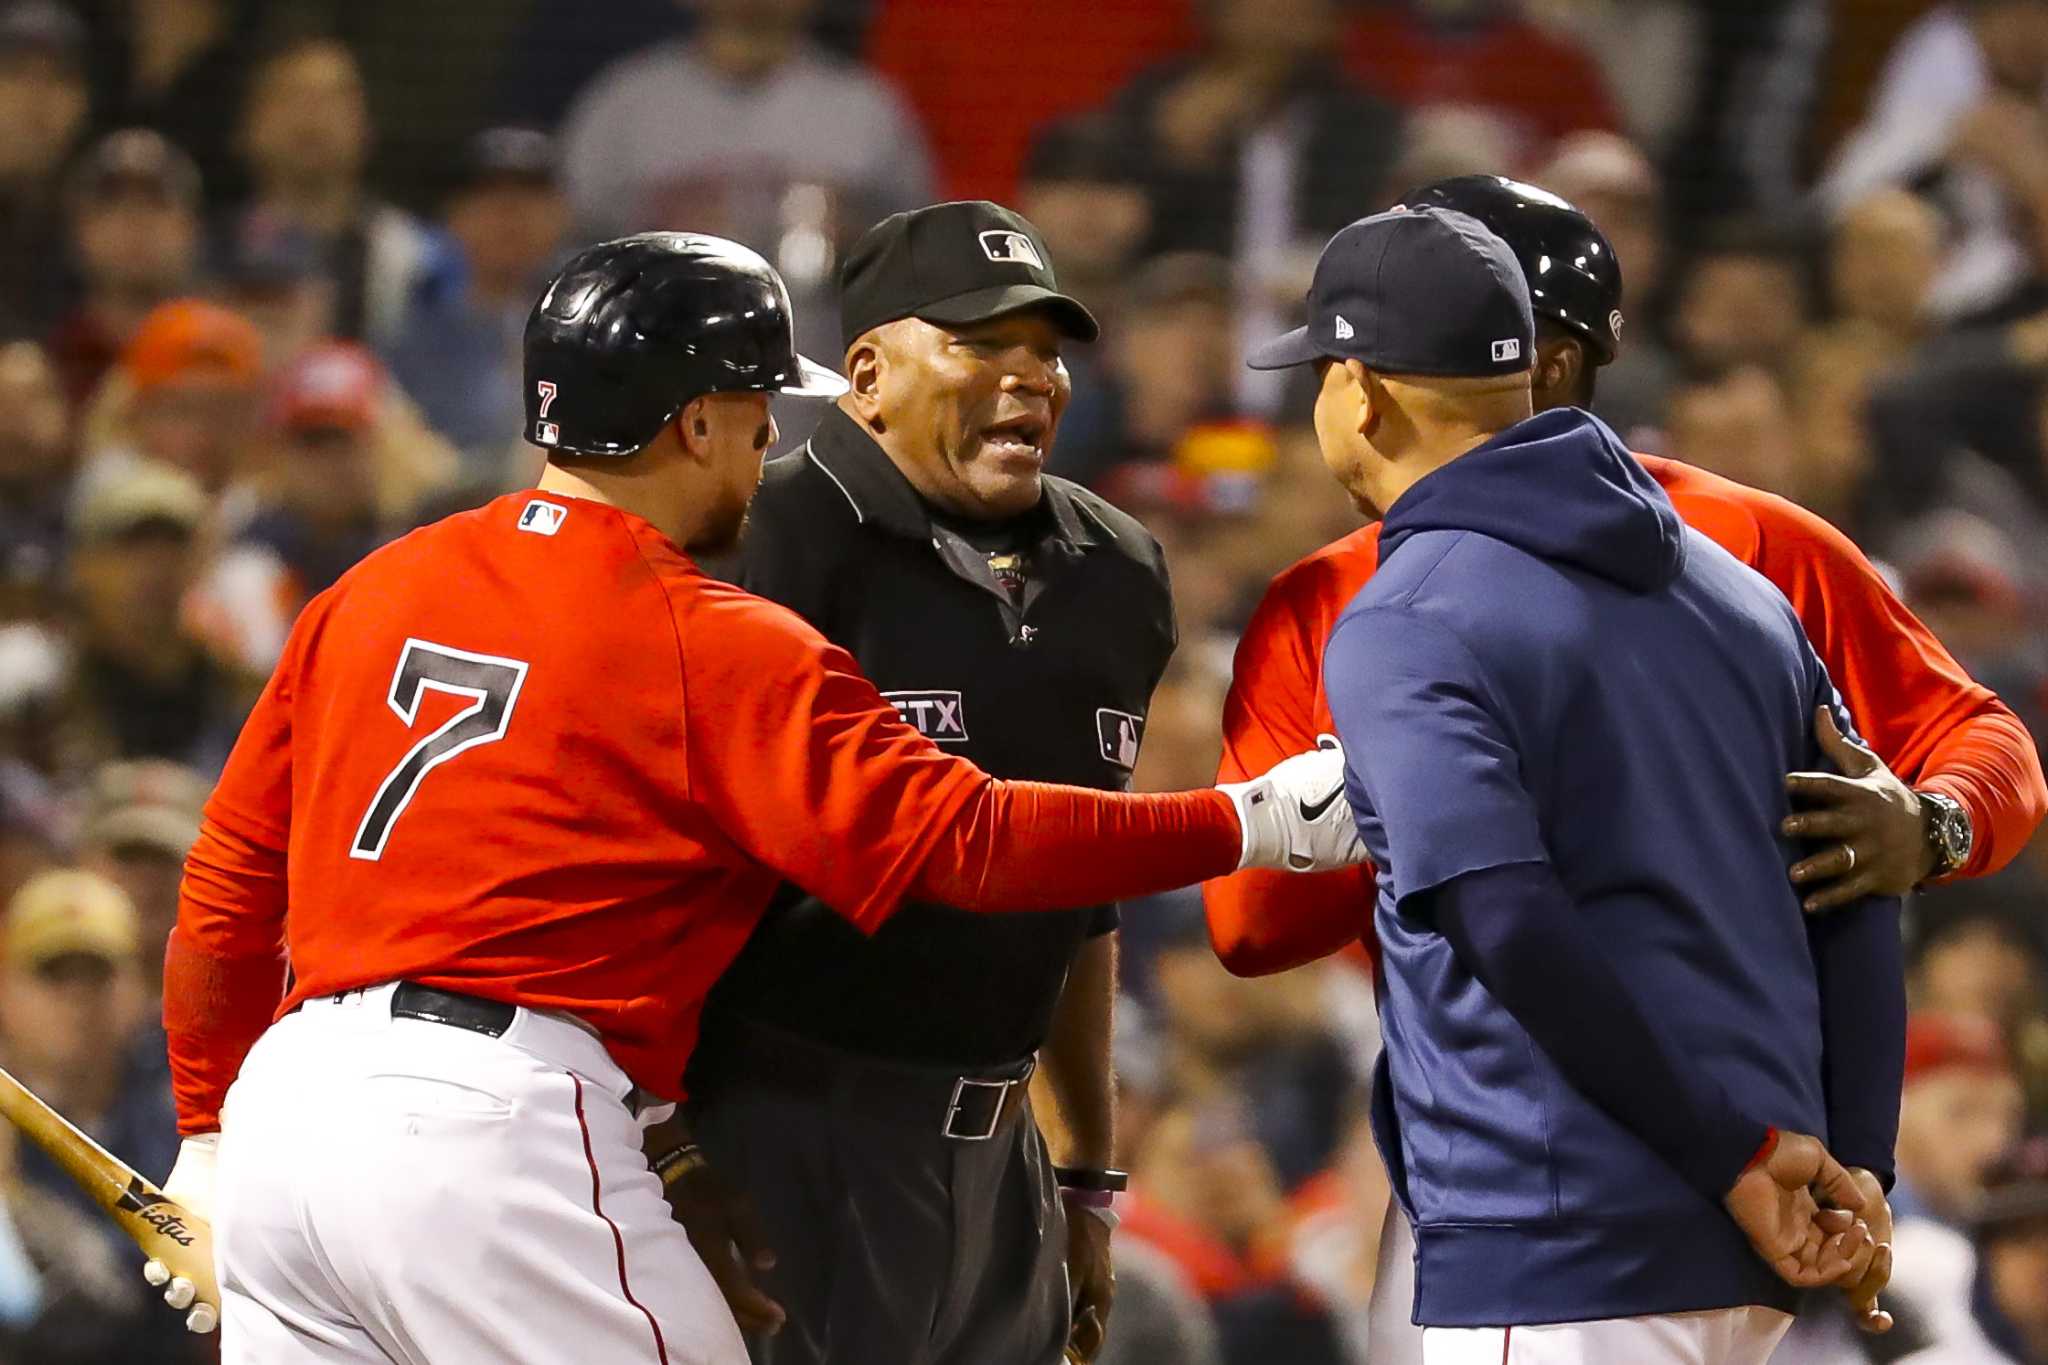 Astros 3, Red Sox 2: Peavy the hard-luck loser again